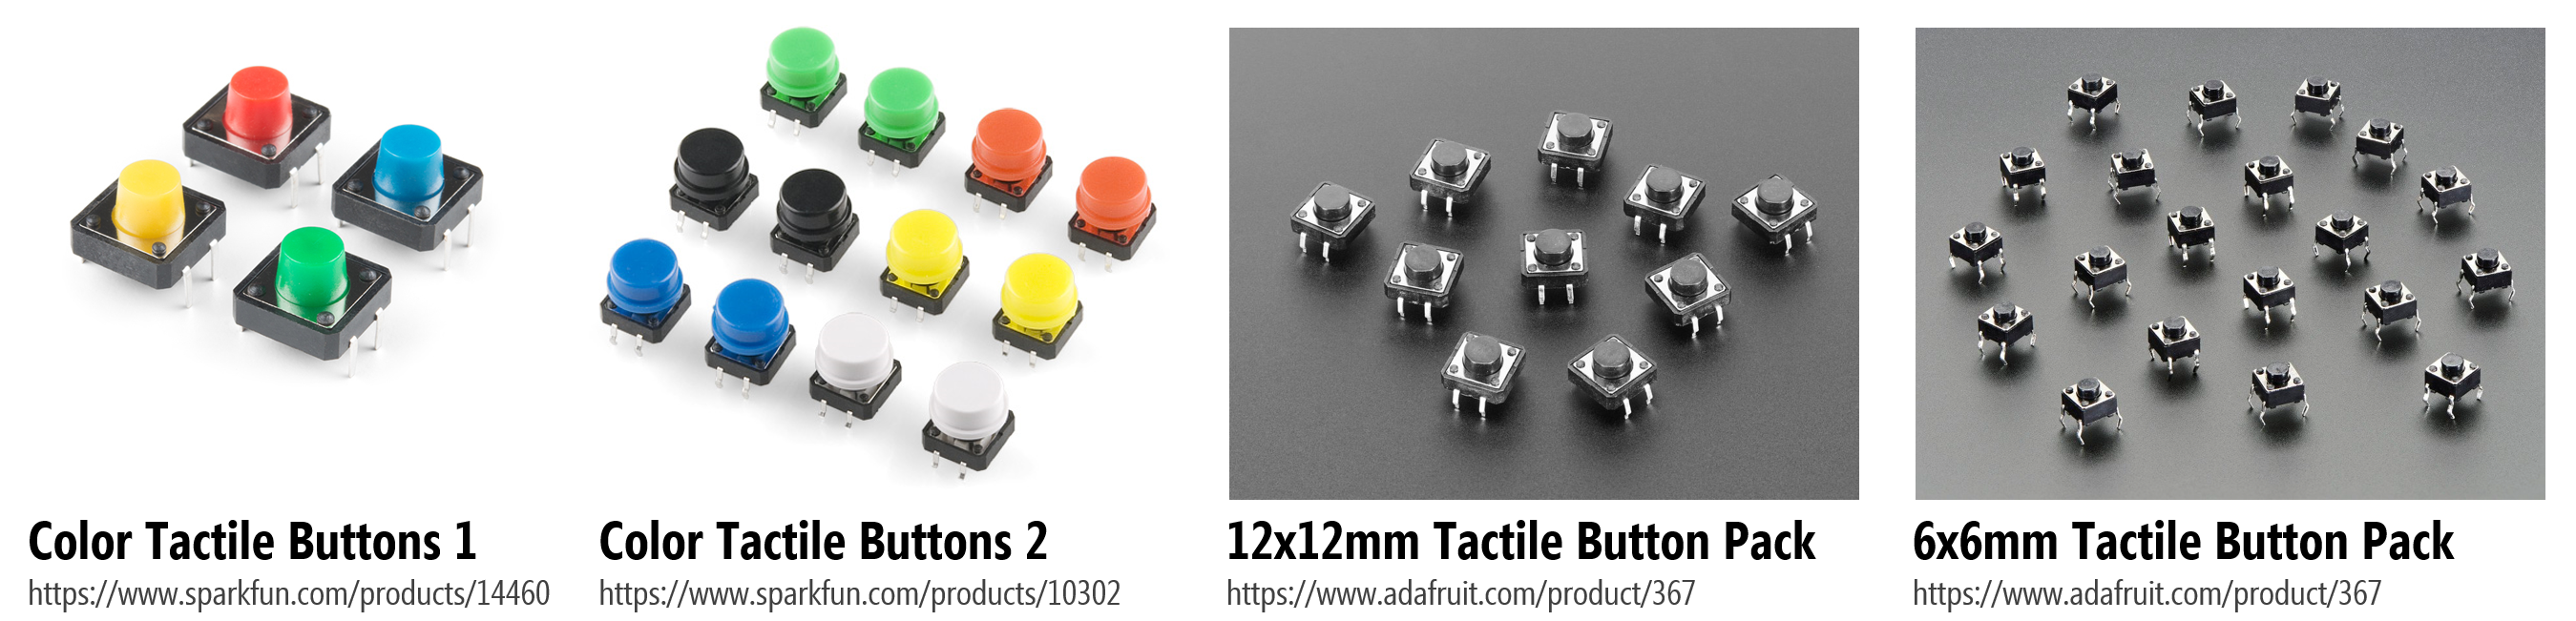 Examples of four-legged buttons from Sparkfun and Adafruit